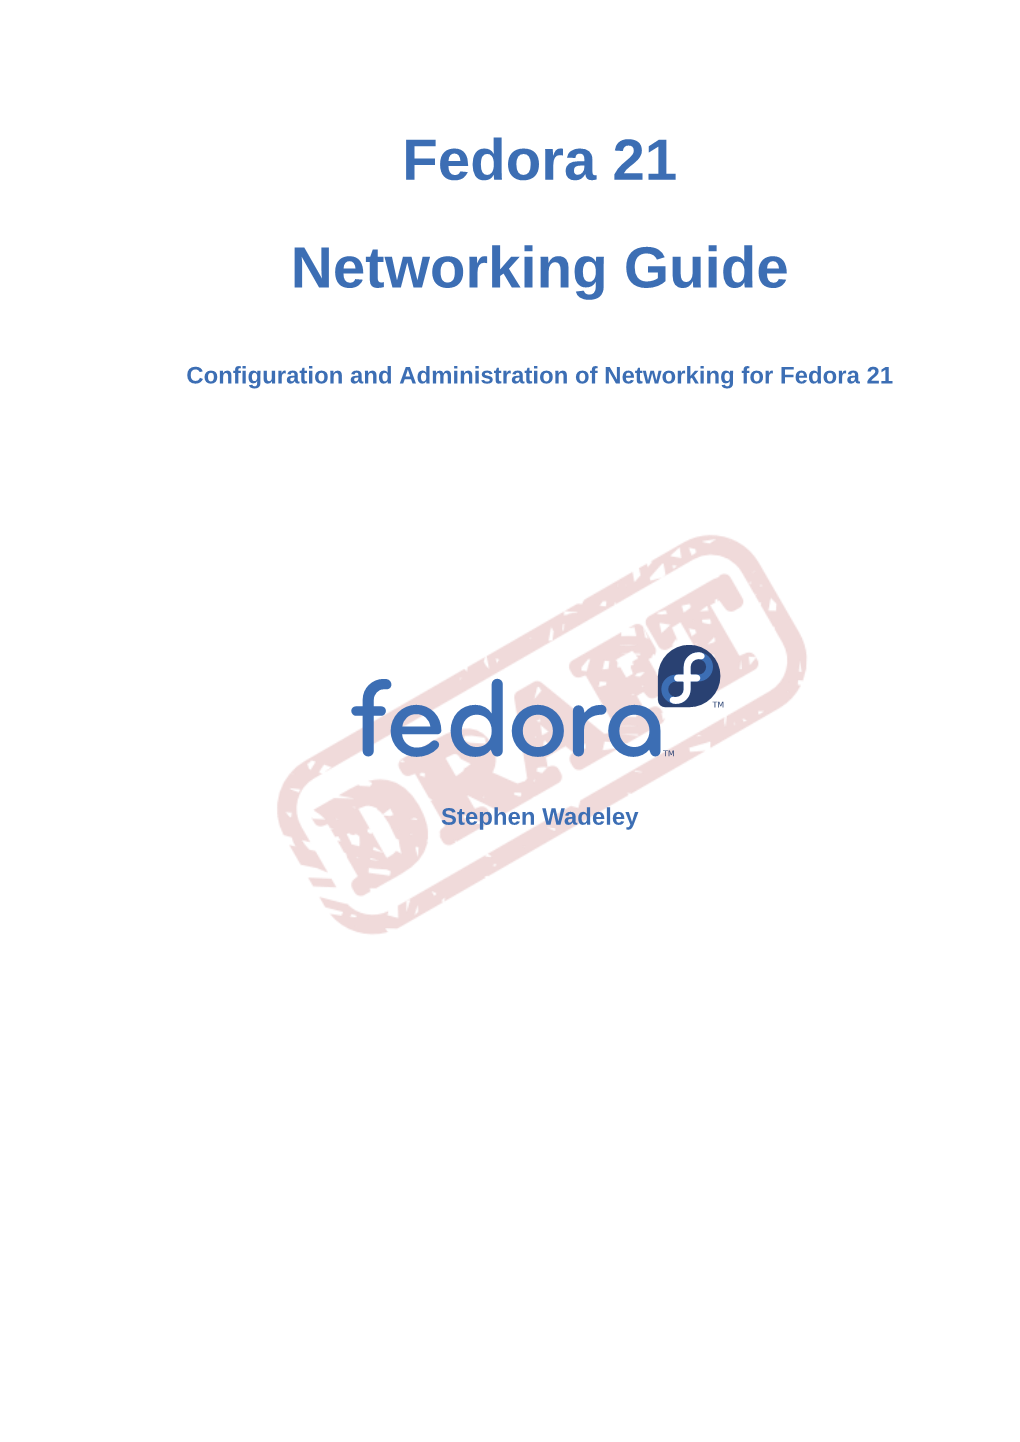 Fedora 21 Networking Guide